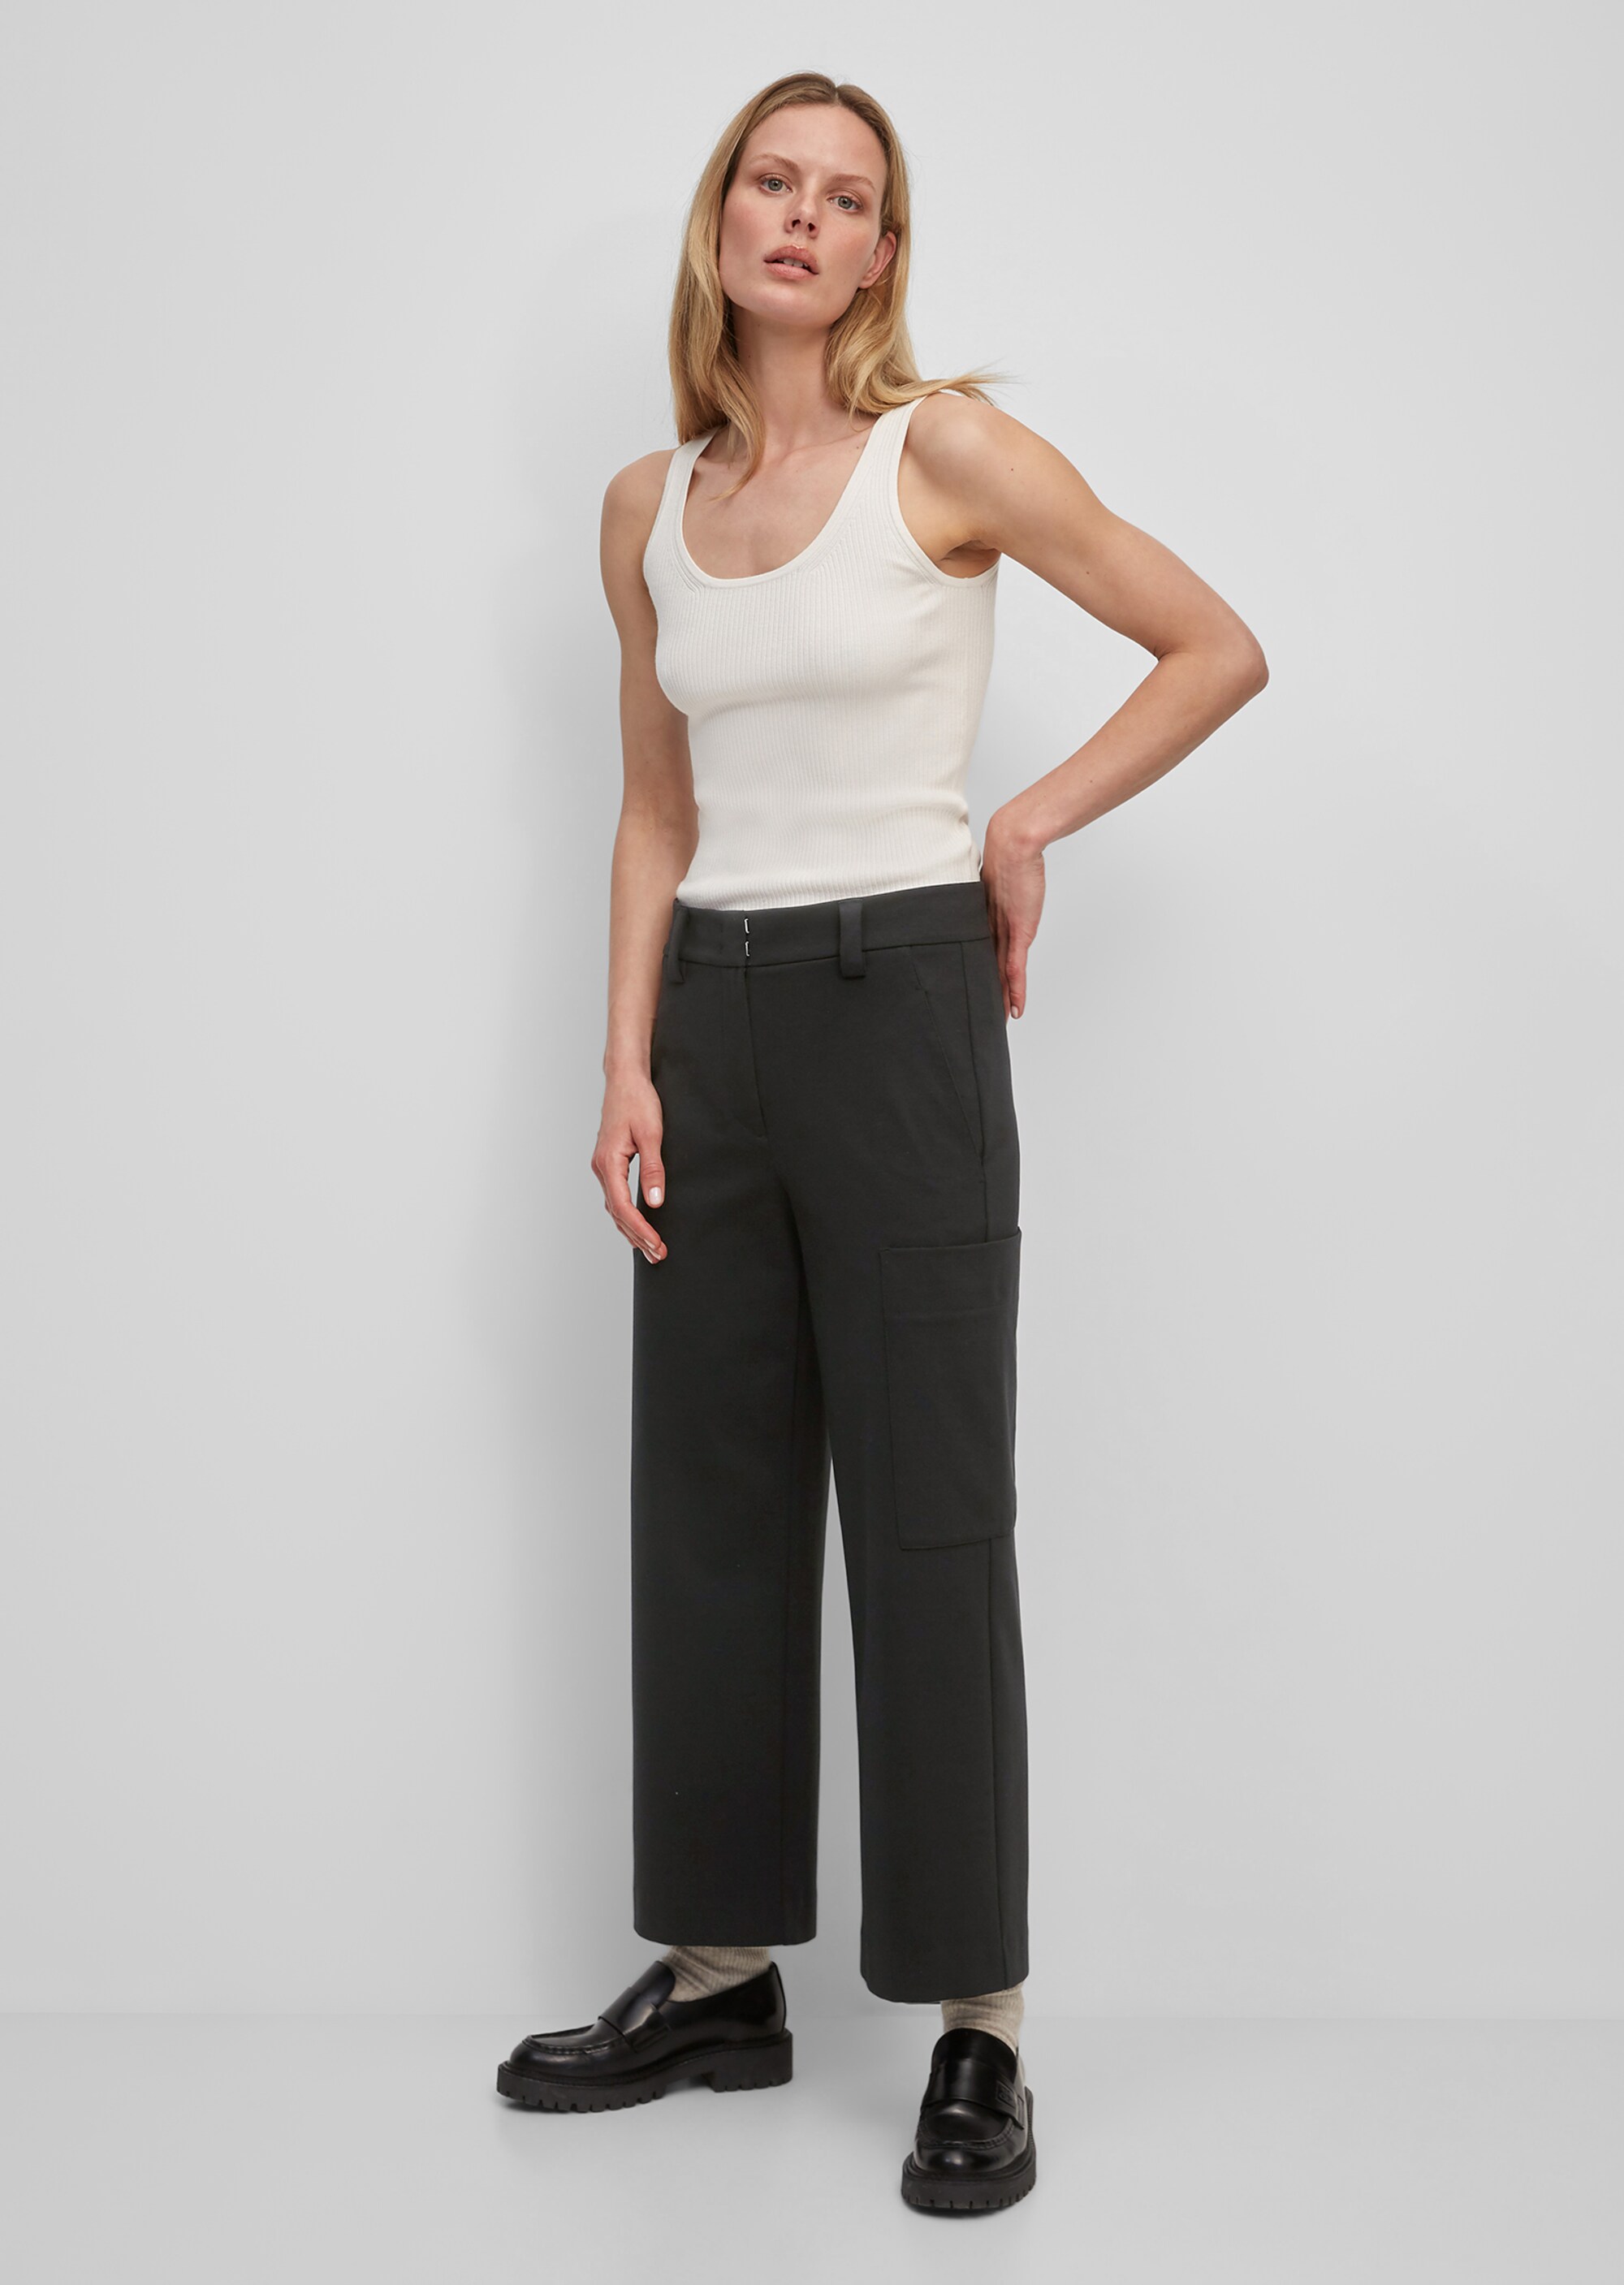 Marc O\u2019Polo Culottes wolwit-zwart gestreept patroon casual uitstraling Mode Broeken Culottes Marc O’Polo 